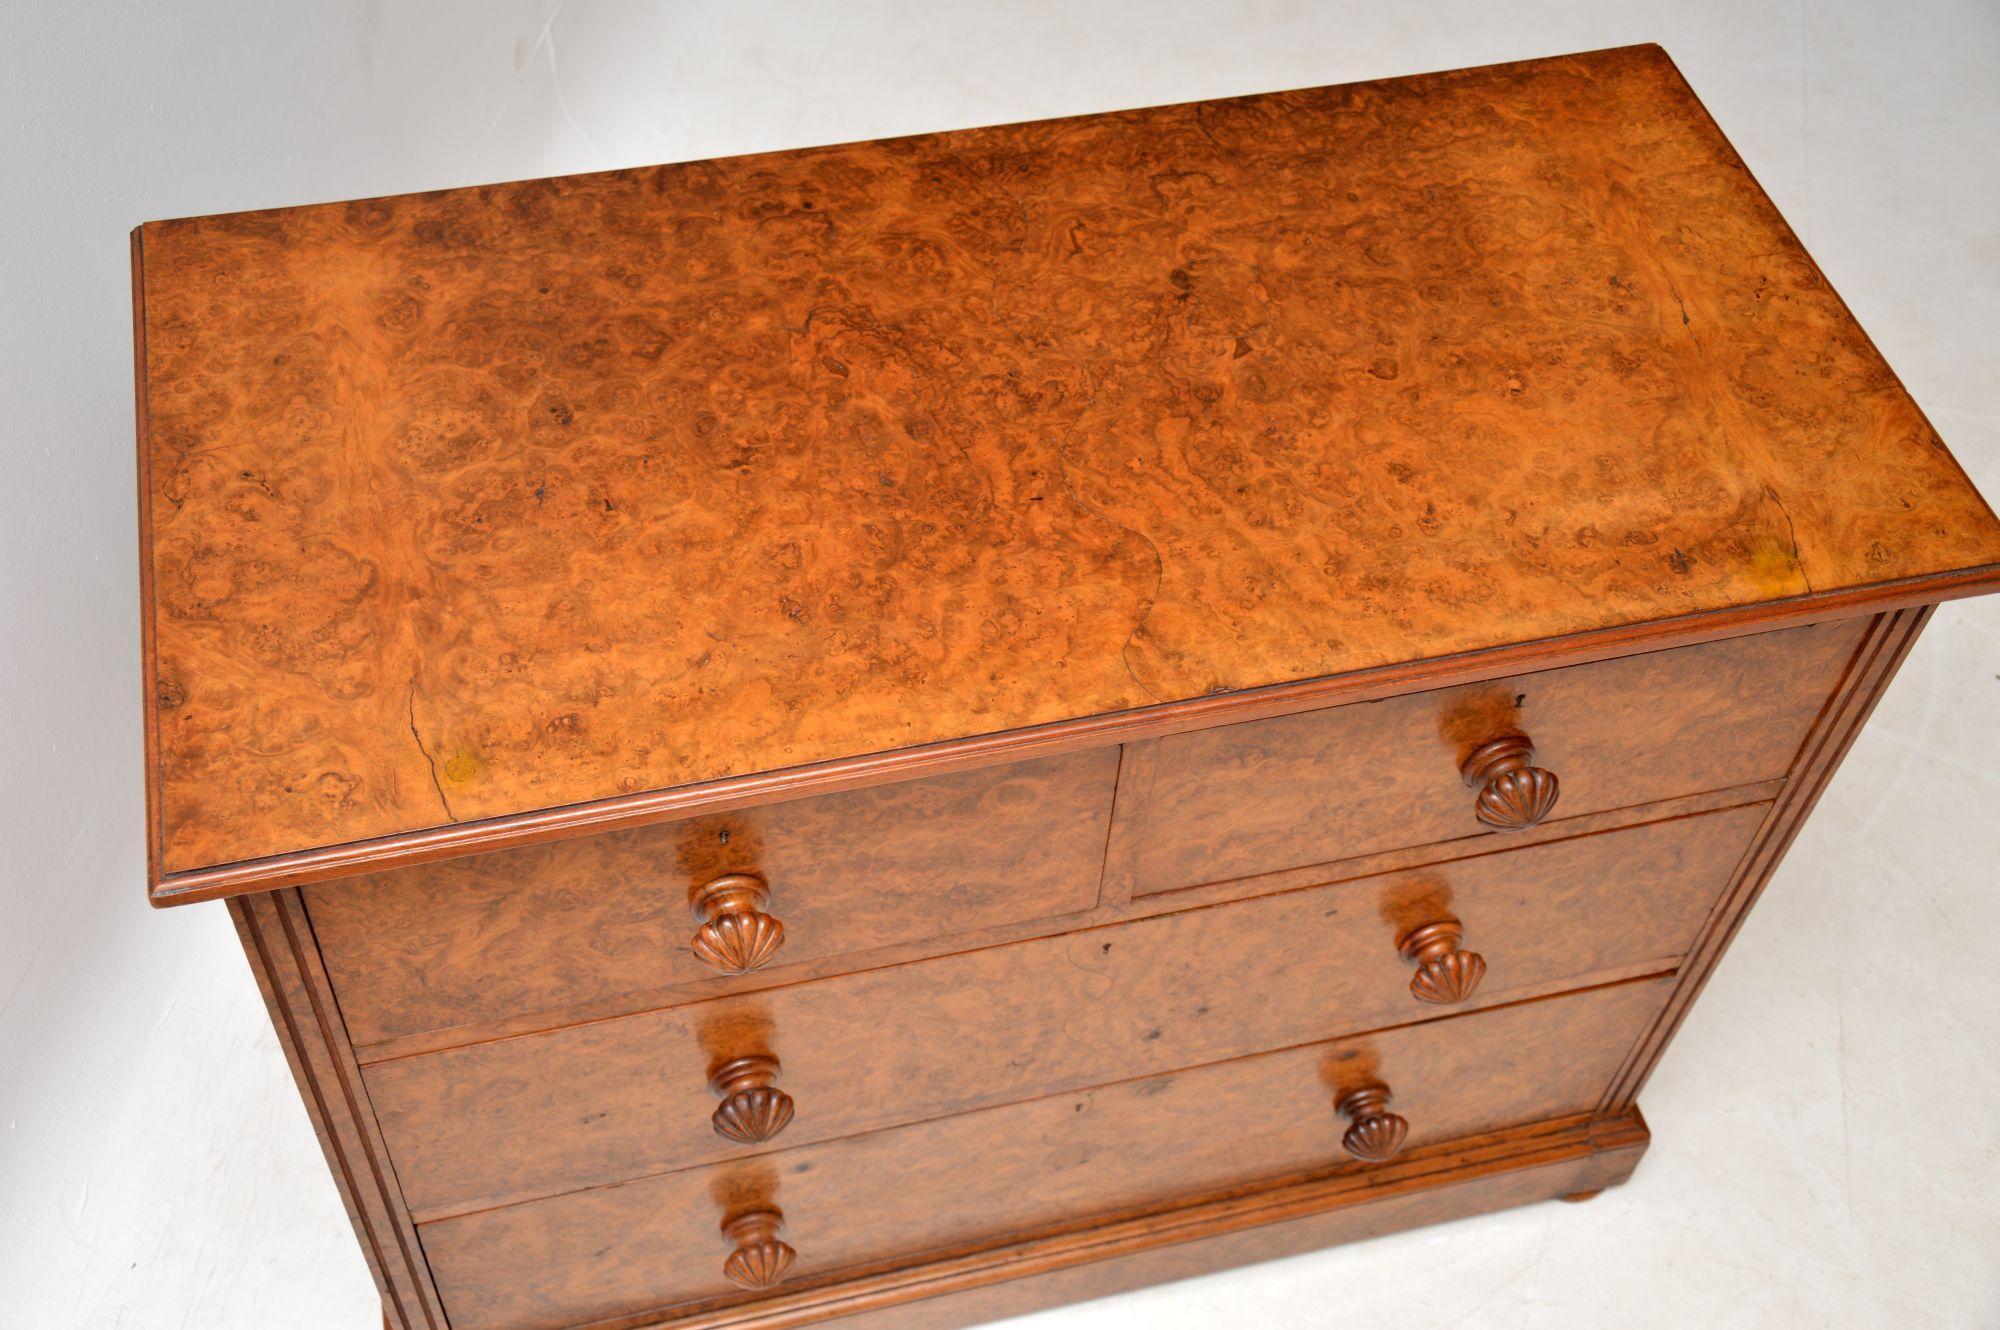 Antique Victorian Burr Walnut Chest of Drawers by James Shoolbred 1